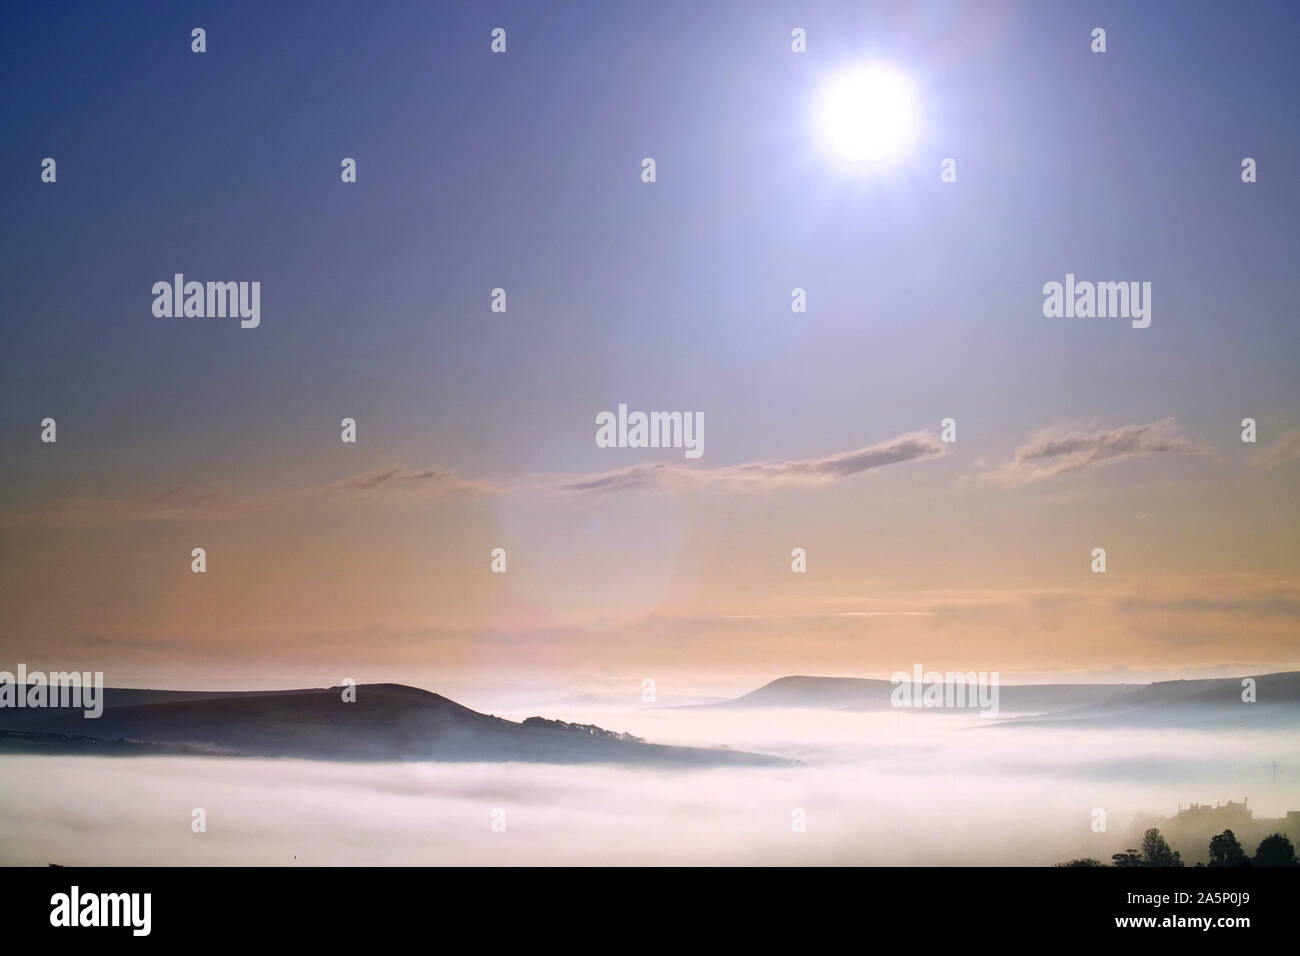 Lewes, East Sussex, UK. 22nd October 2019: A thick blanket of morning mist covers the historic town of Lewes, East Sussex, with only the peaks of the surrounding South Downs national park visible.   © Peter Cripps/Alamy Live News Stock Photo